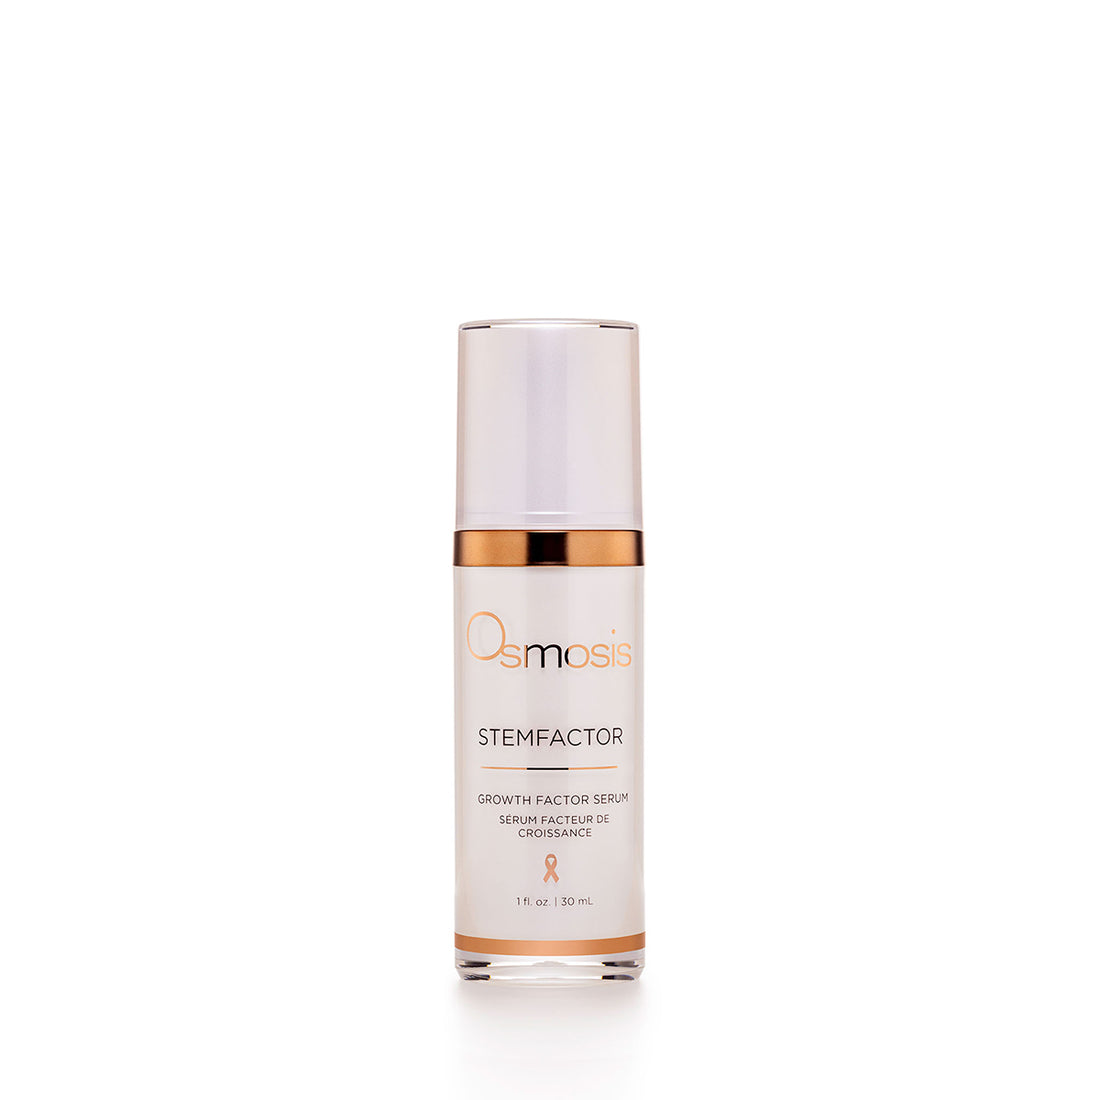 Osmosis Skincare Stemfactor Serum reverses aging by stimulating new cells and collagen for radiant skin.